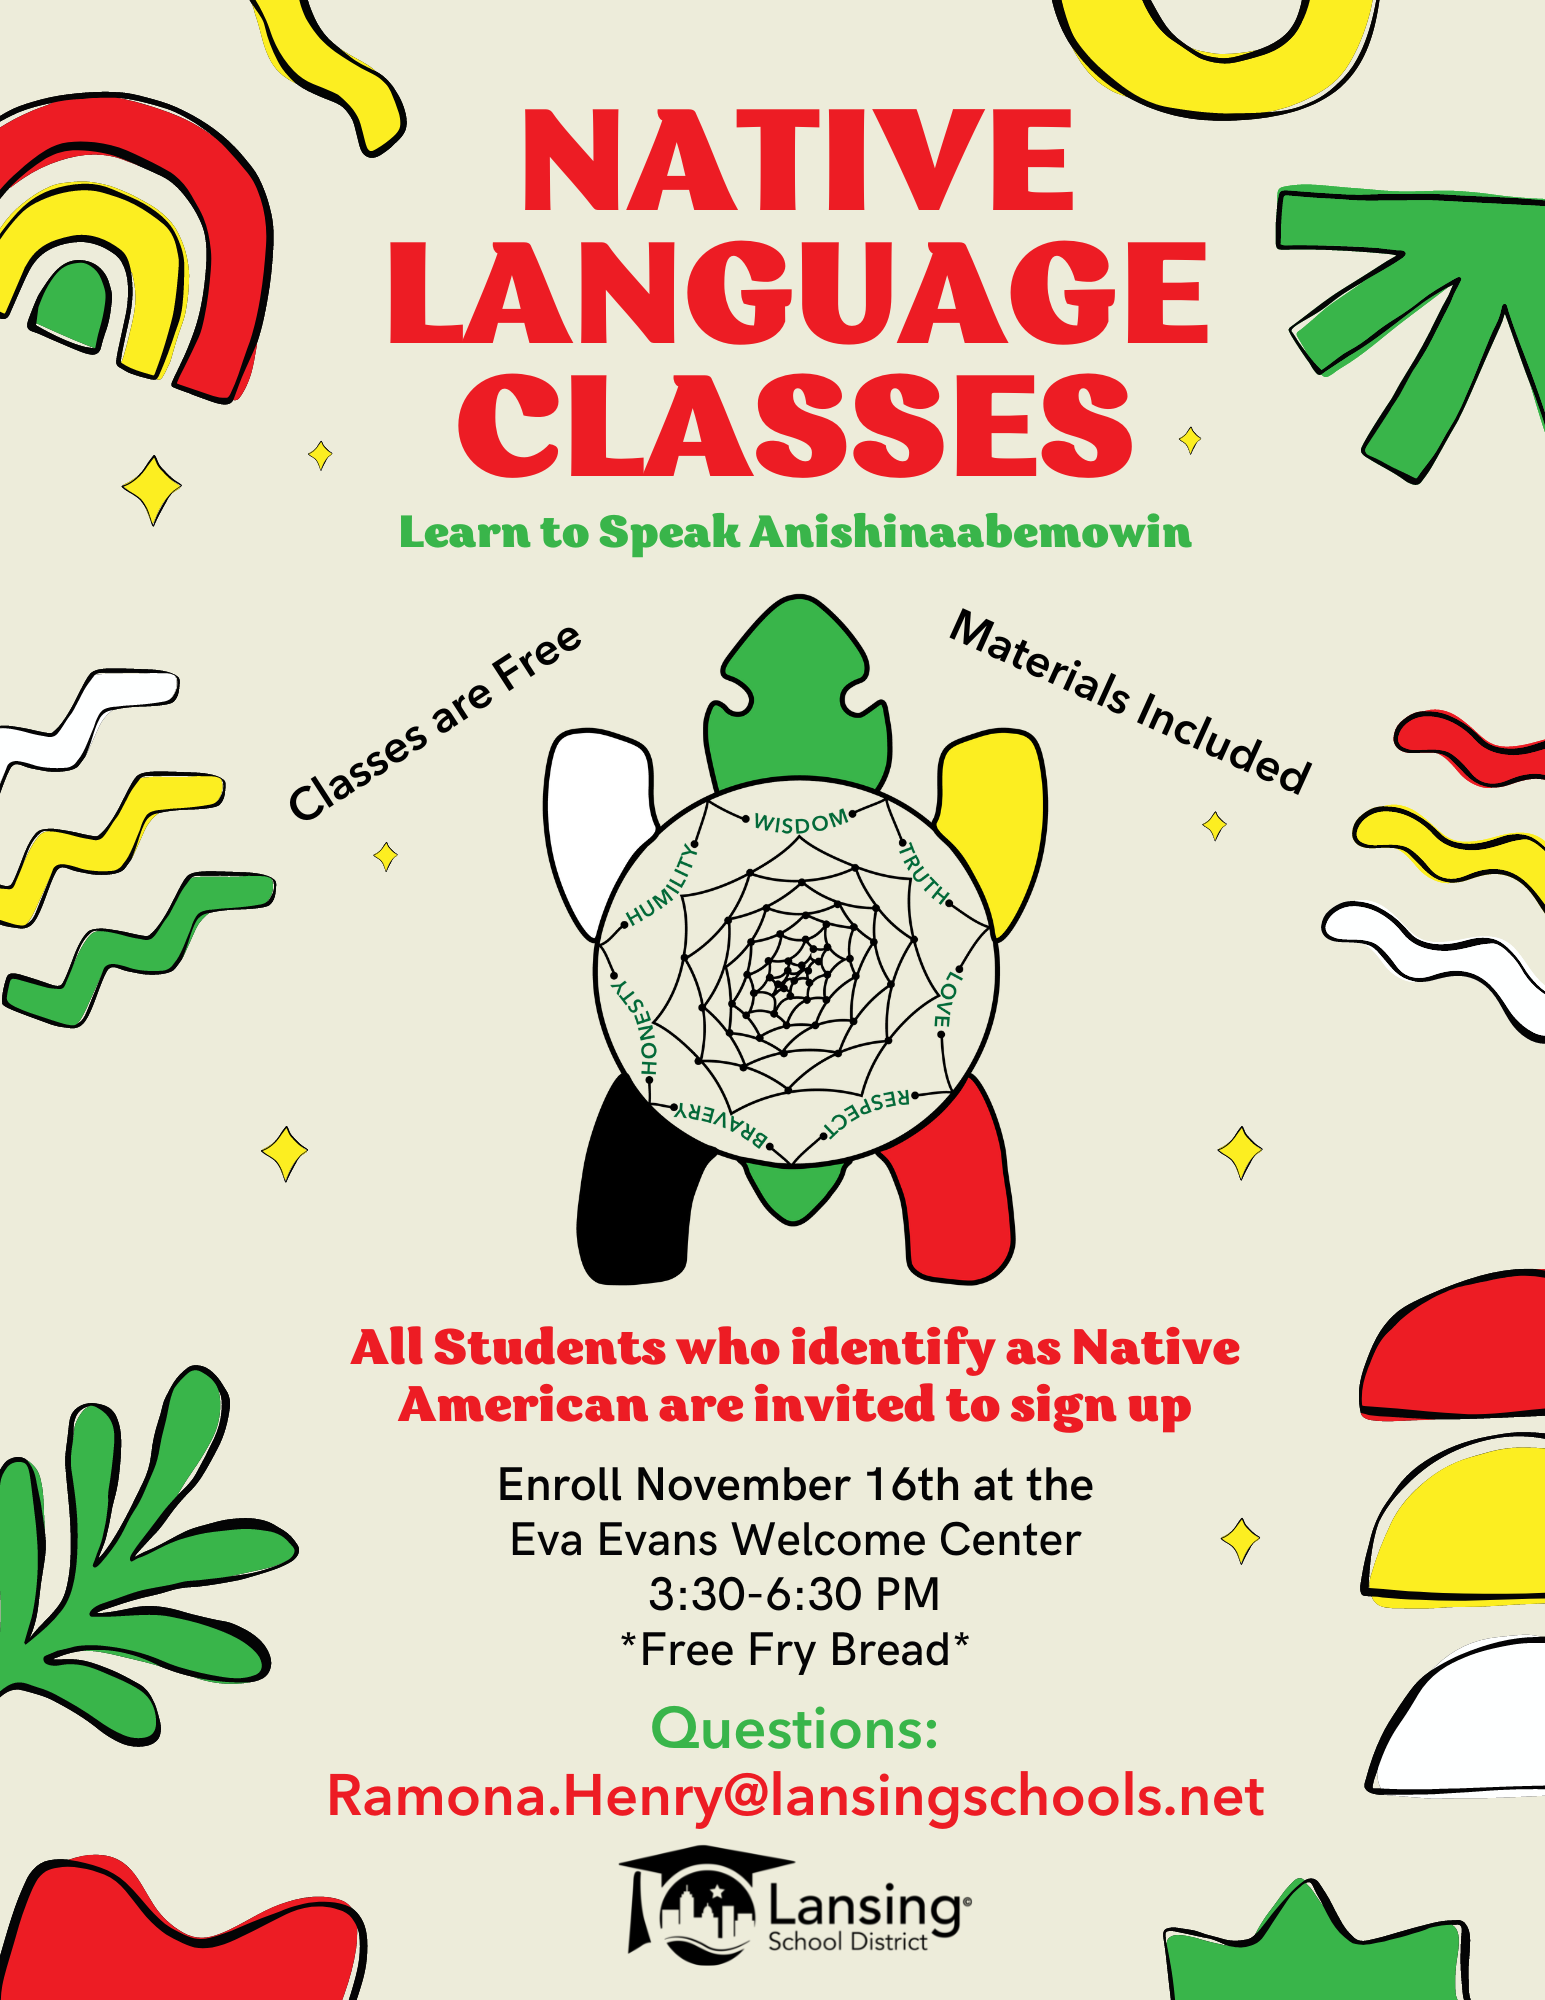 An image of the flyer for the Native American Language Classes